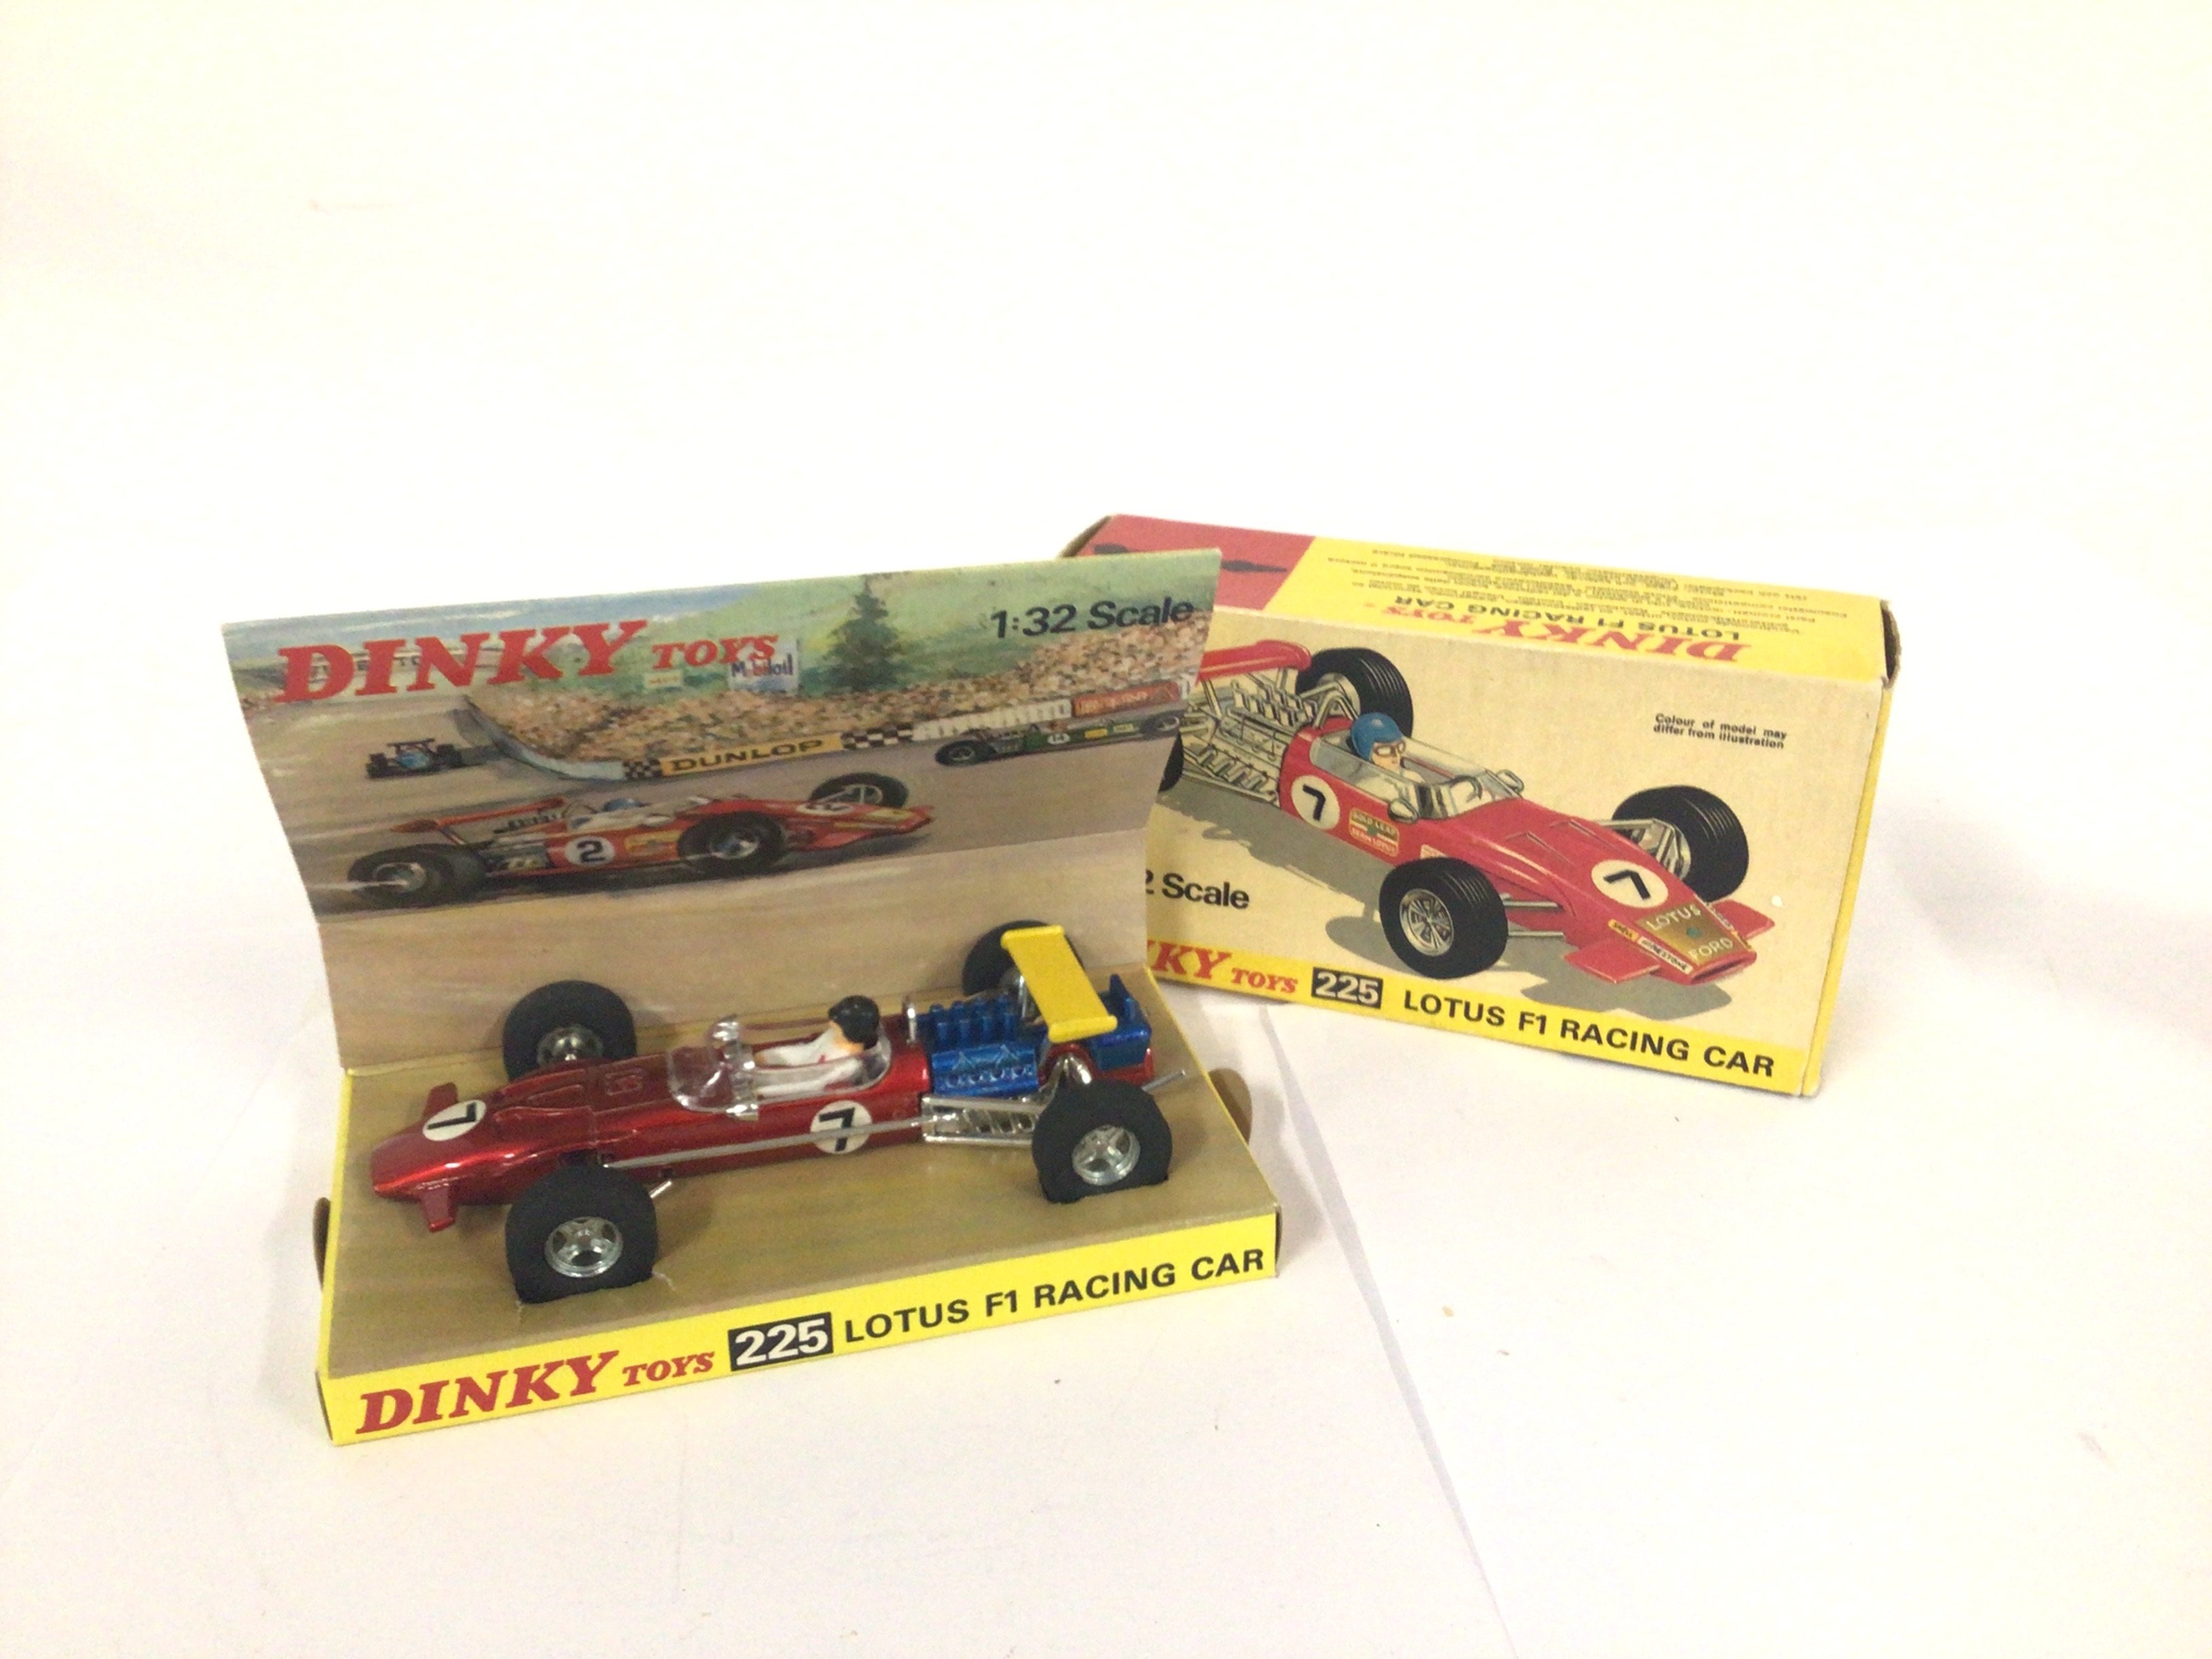 A Boxed Dinky Toys Lotus F1 Racing Car #225 A Boxe - Image 3 of 4